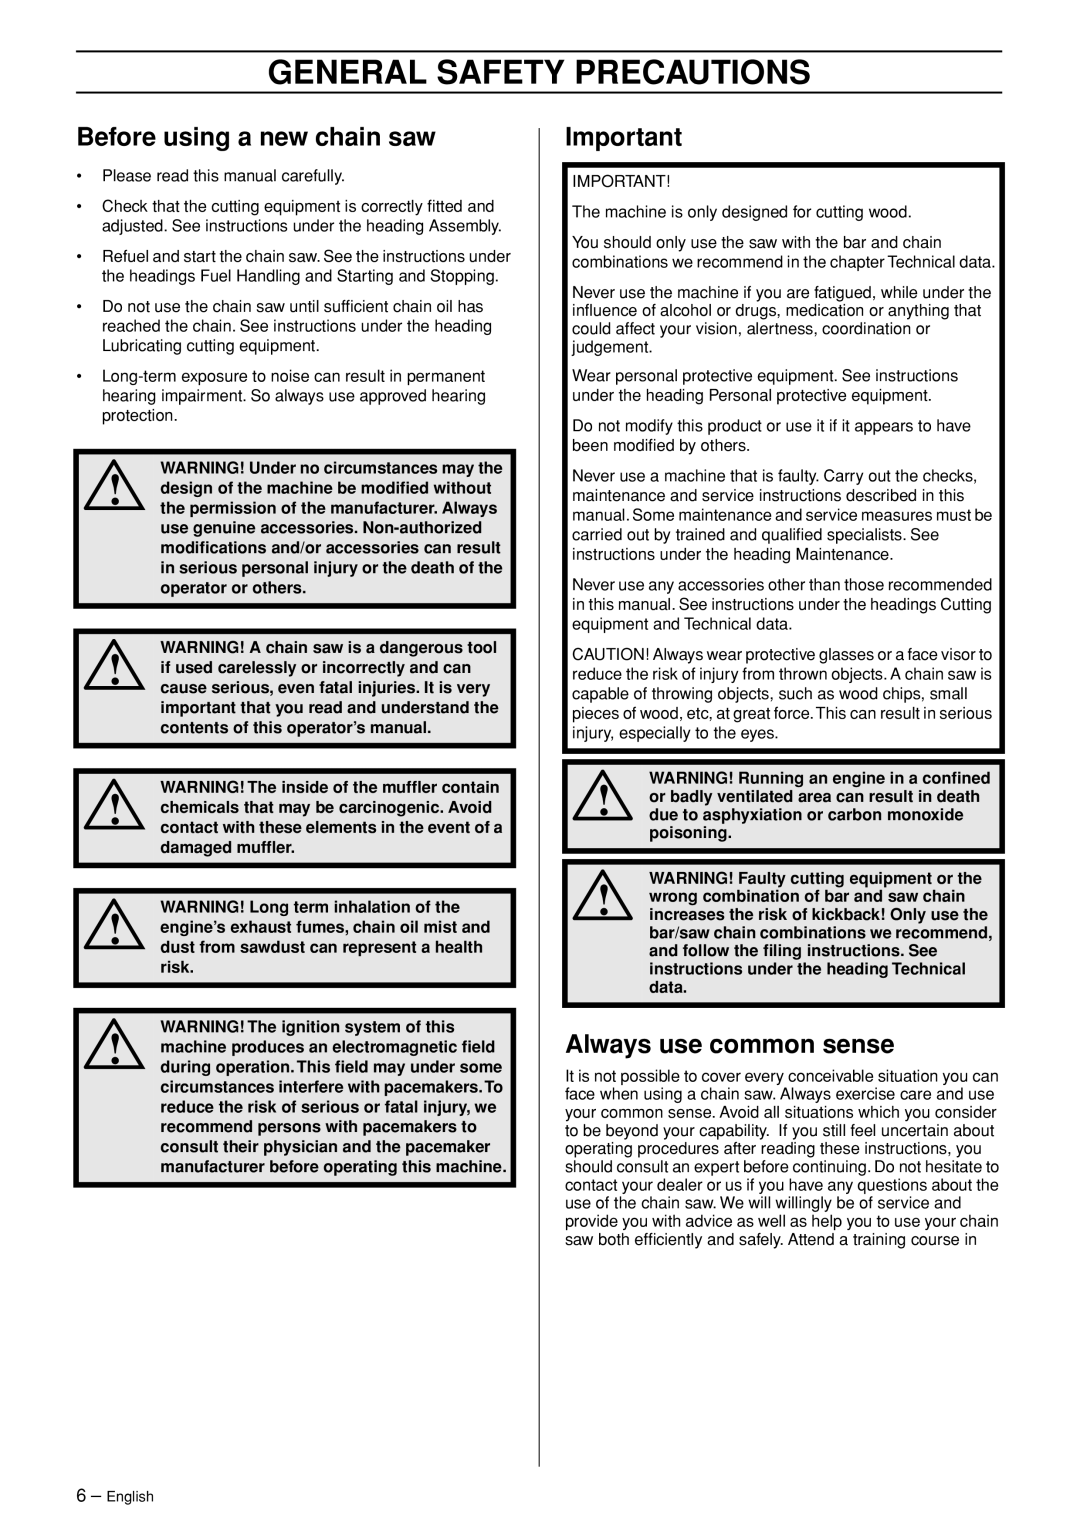 Jonsered CS 2139T manual General Safety Precautions, Before using a new chain saw, Always use common sense 